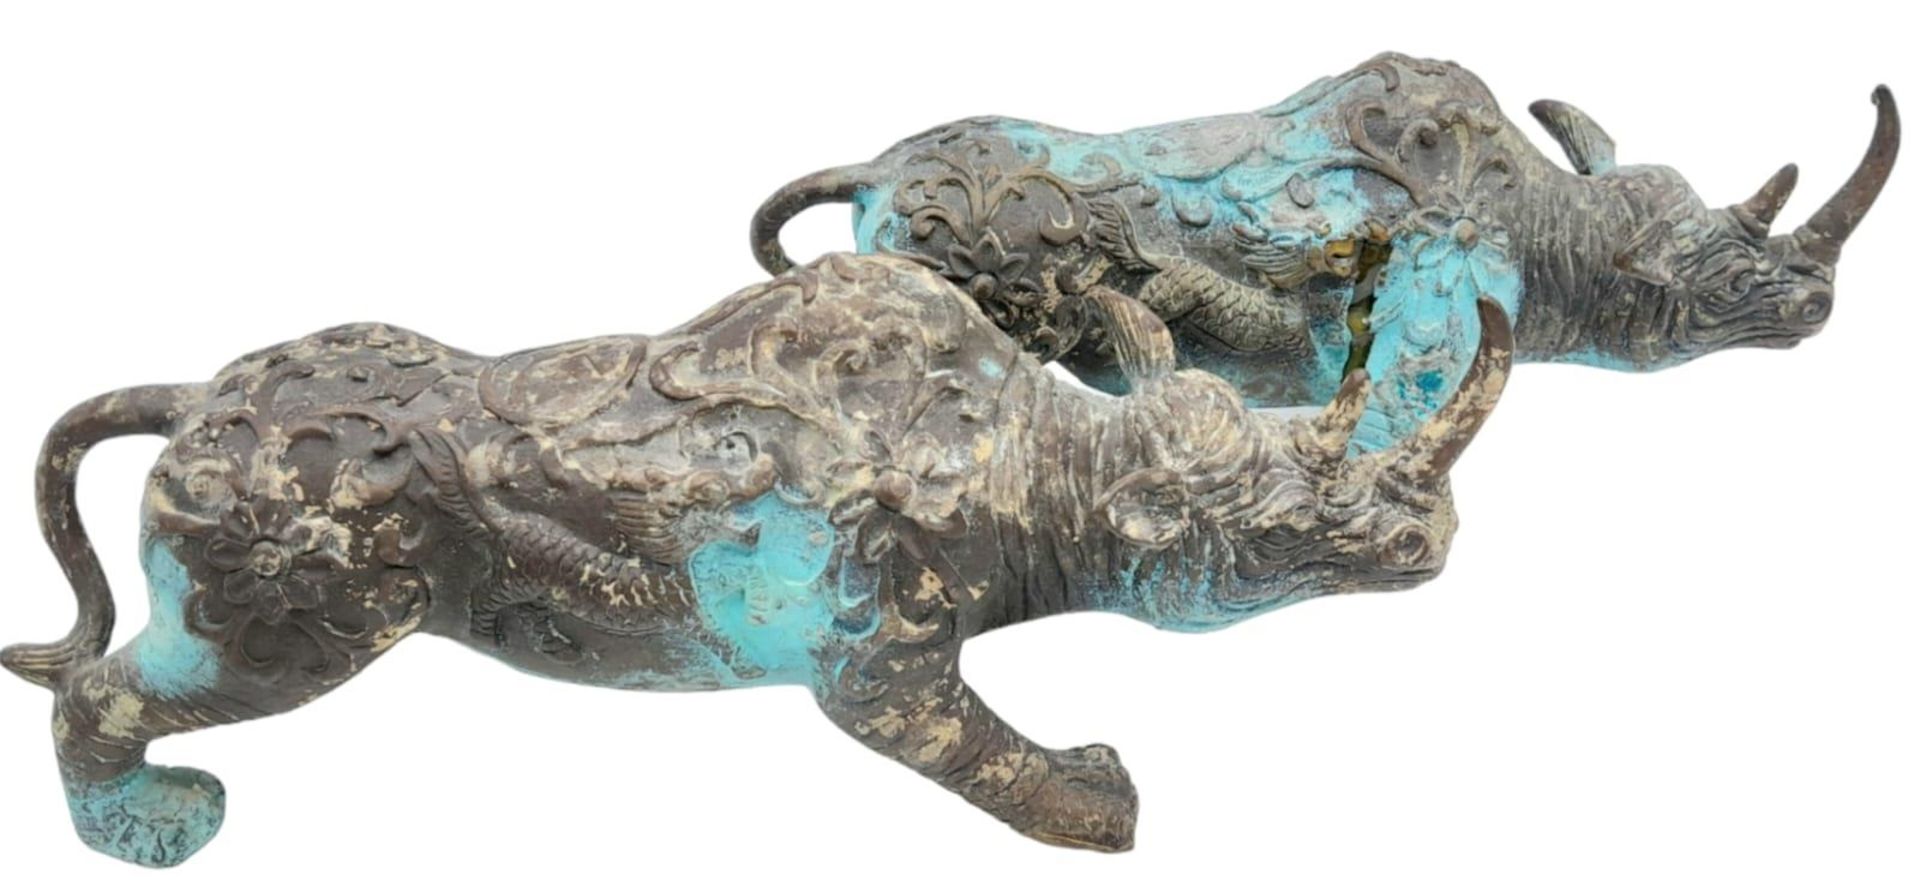 A PAIR OF VERY EARLY ANTIQUE CHINESE BRONZE WARE CEREMONIAL RHINOCEROSES WITH DRAGON ON FLANKS,